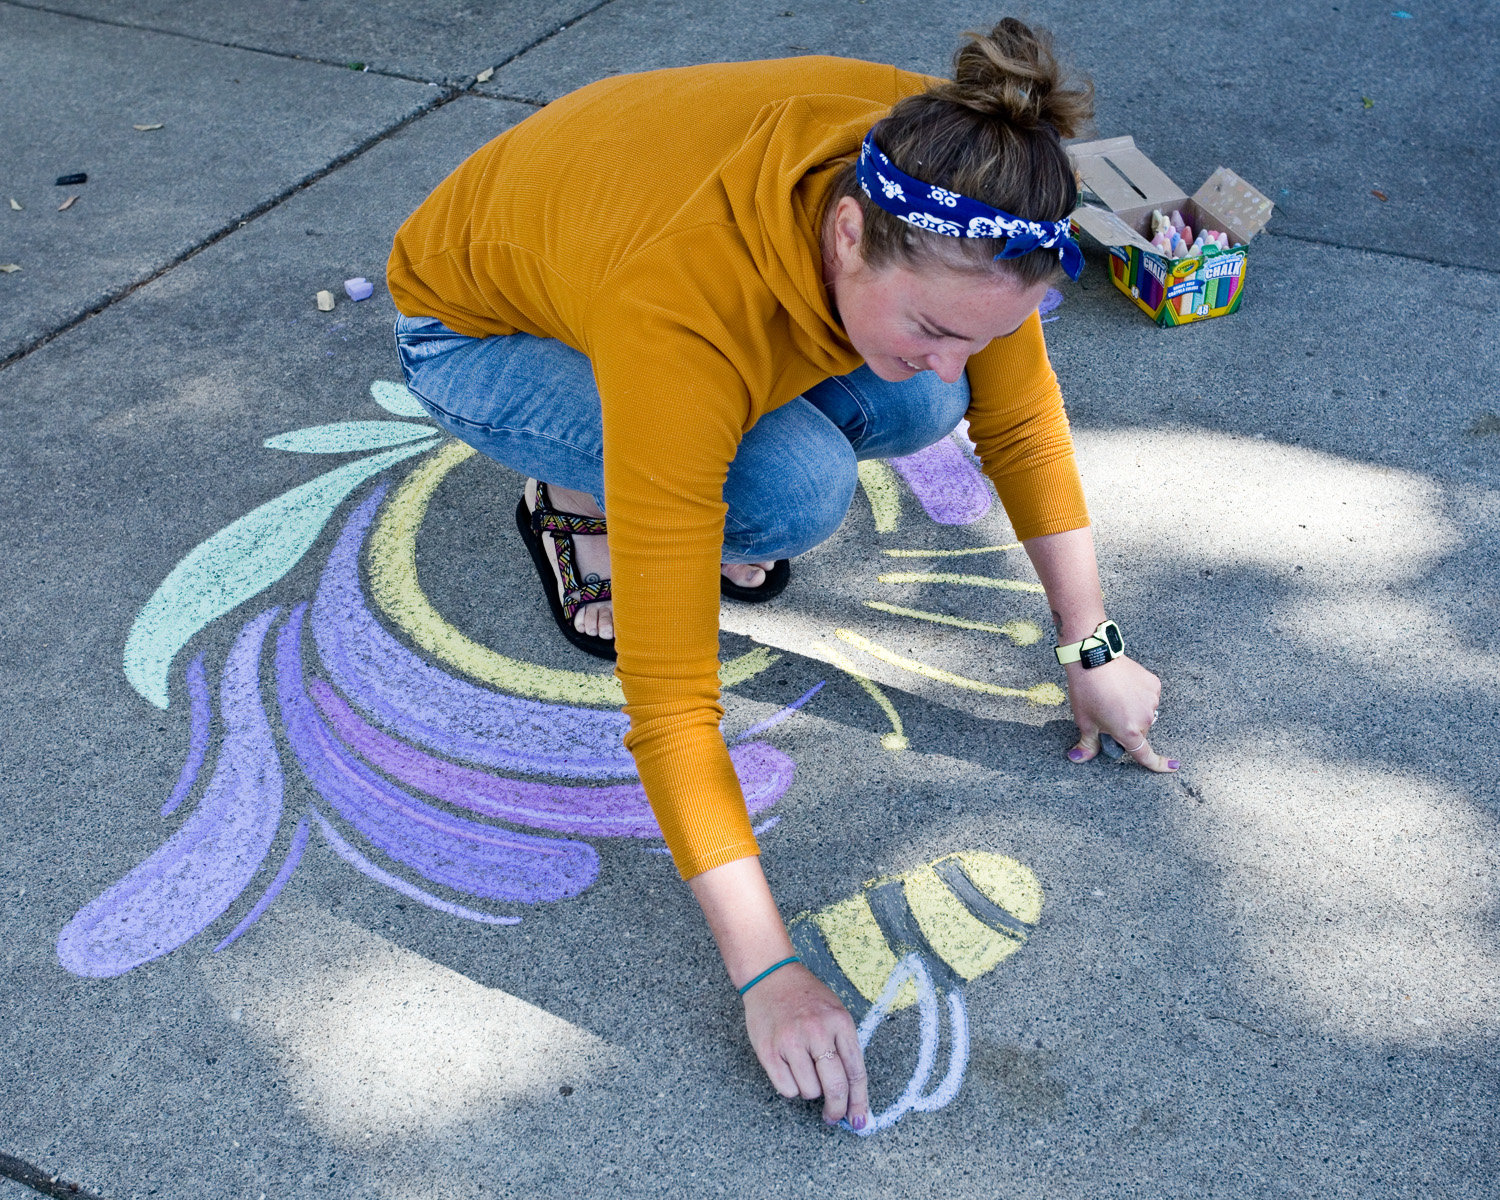 Taylor Tinkham is a chalk artist and illustrator living in Longfellow. Her chalk and mindfulness project, called CeMental Break, has been featured nationally in print media and online. Her illustrations encourage living mindfully in the present moment. View her work at www.taylortinkham.com. (Photo by Margie O’Loughlin)